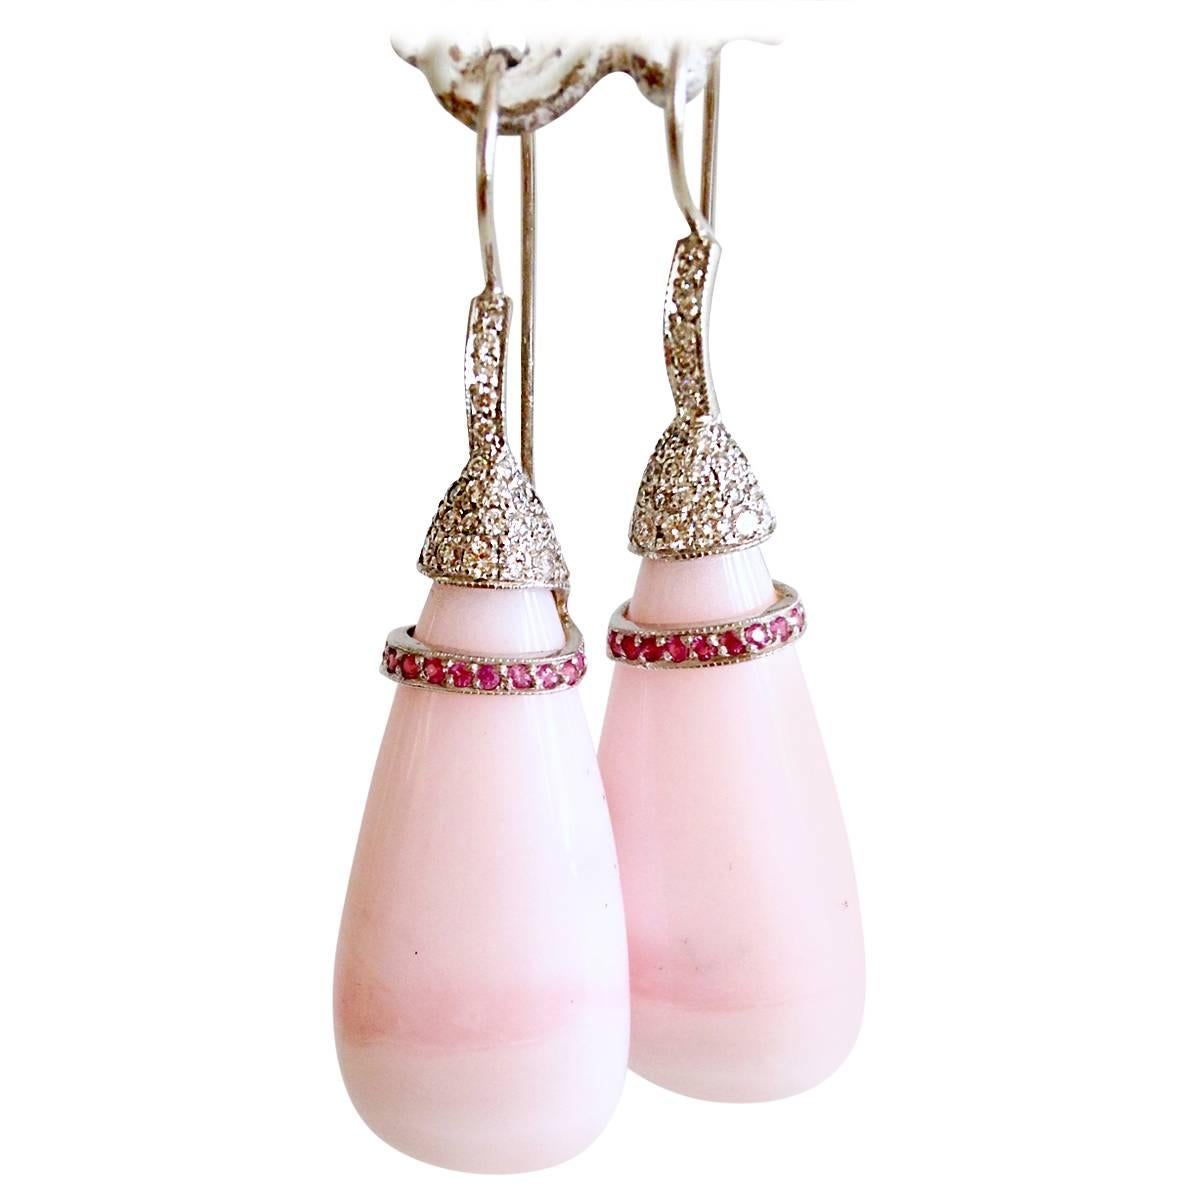 Susan Lister Locke 86.4ct Pink Ice Cream Opal Earrings with Sapphires & Diamonds For Sale